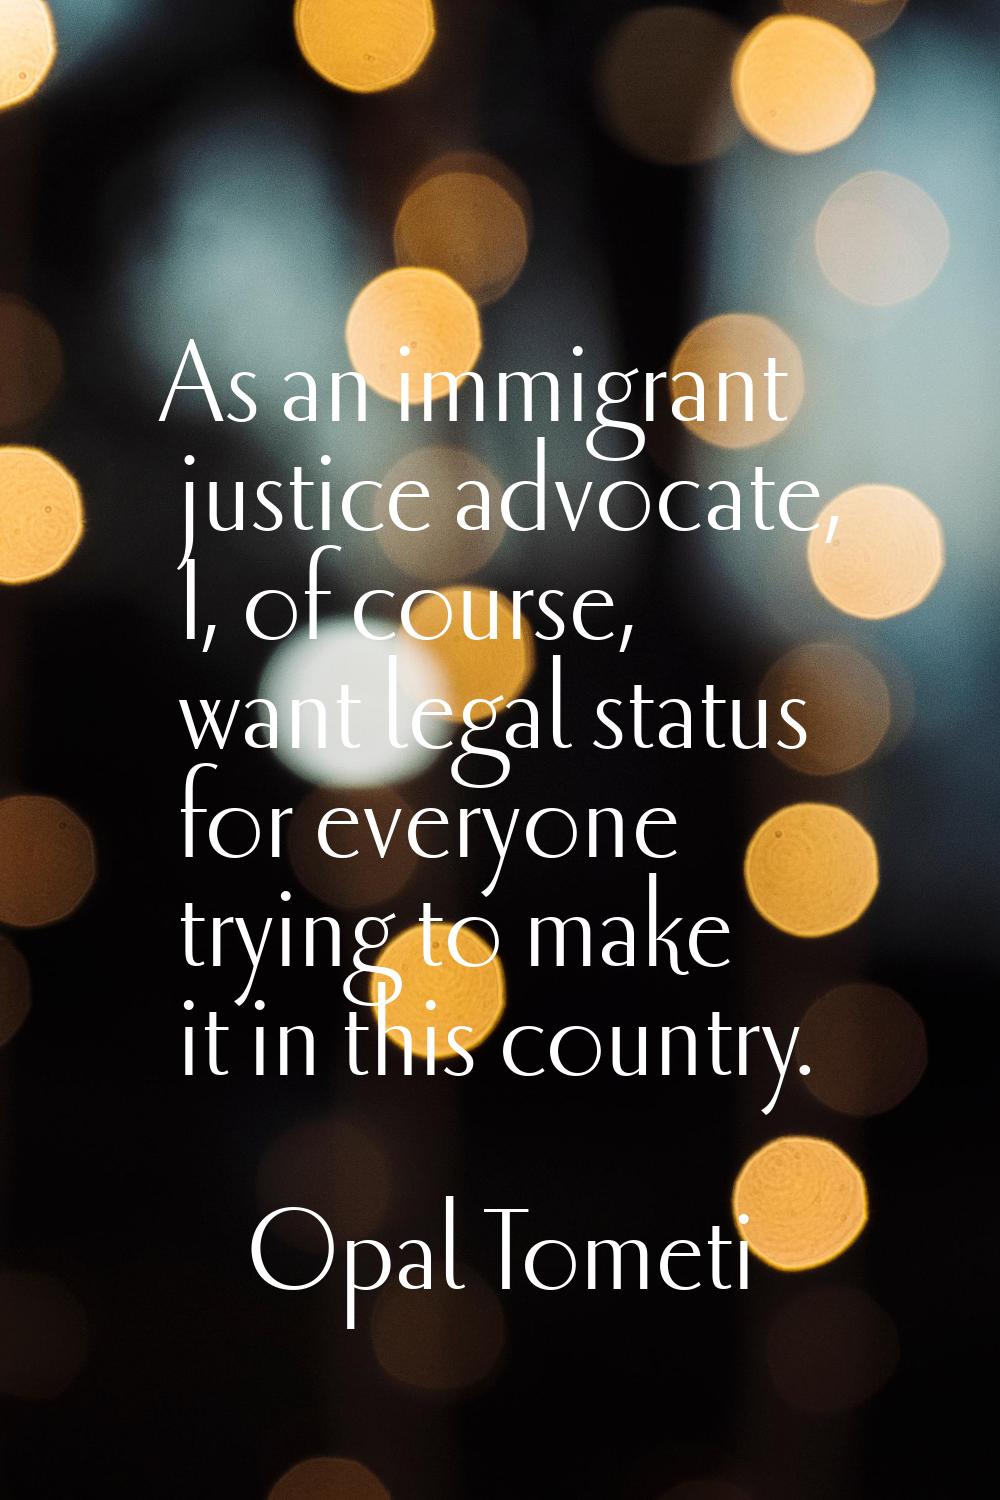 As an immigrant justice advocate, I, of course, want legal status for everyone trying to make it in